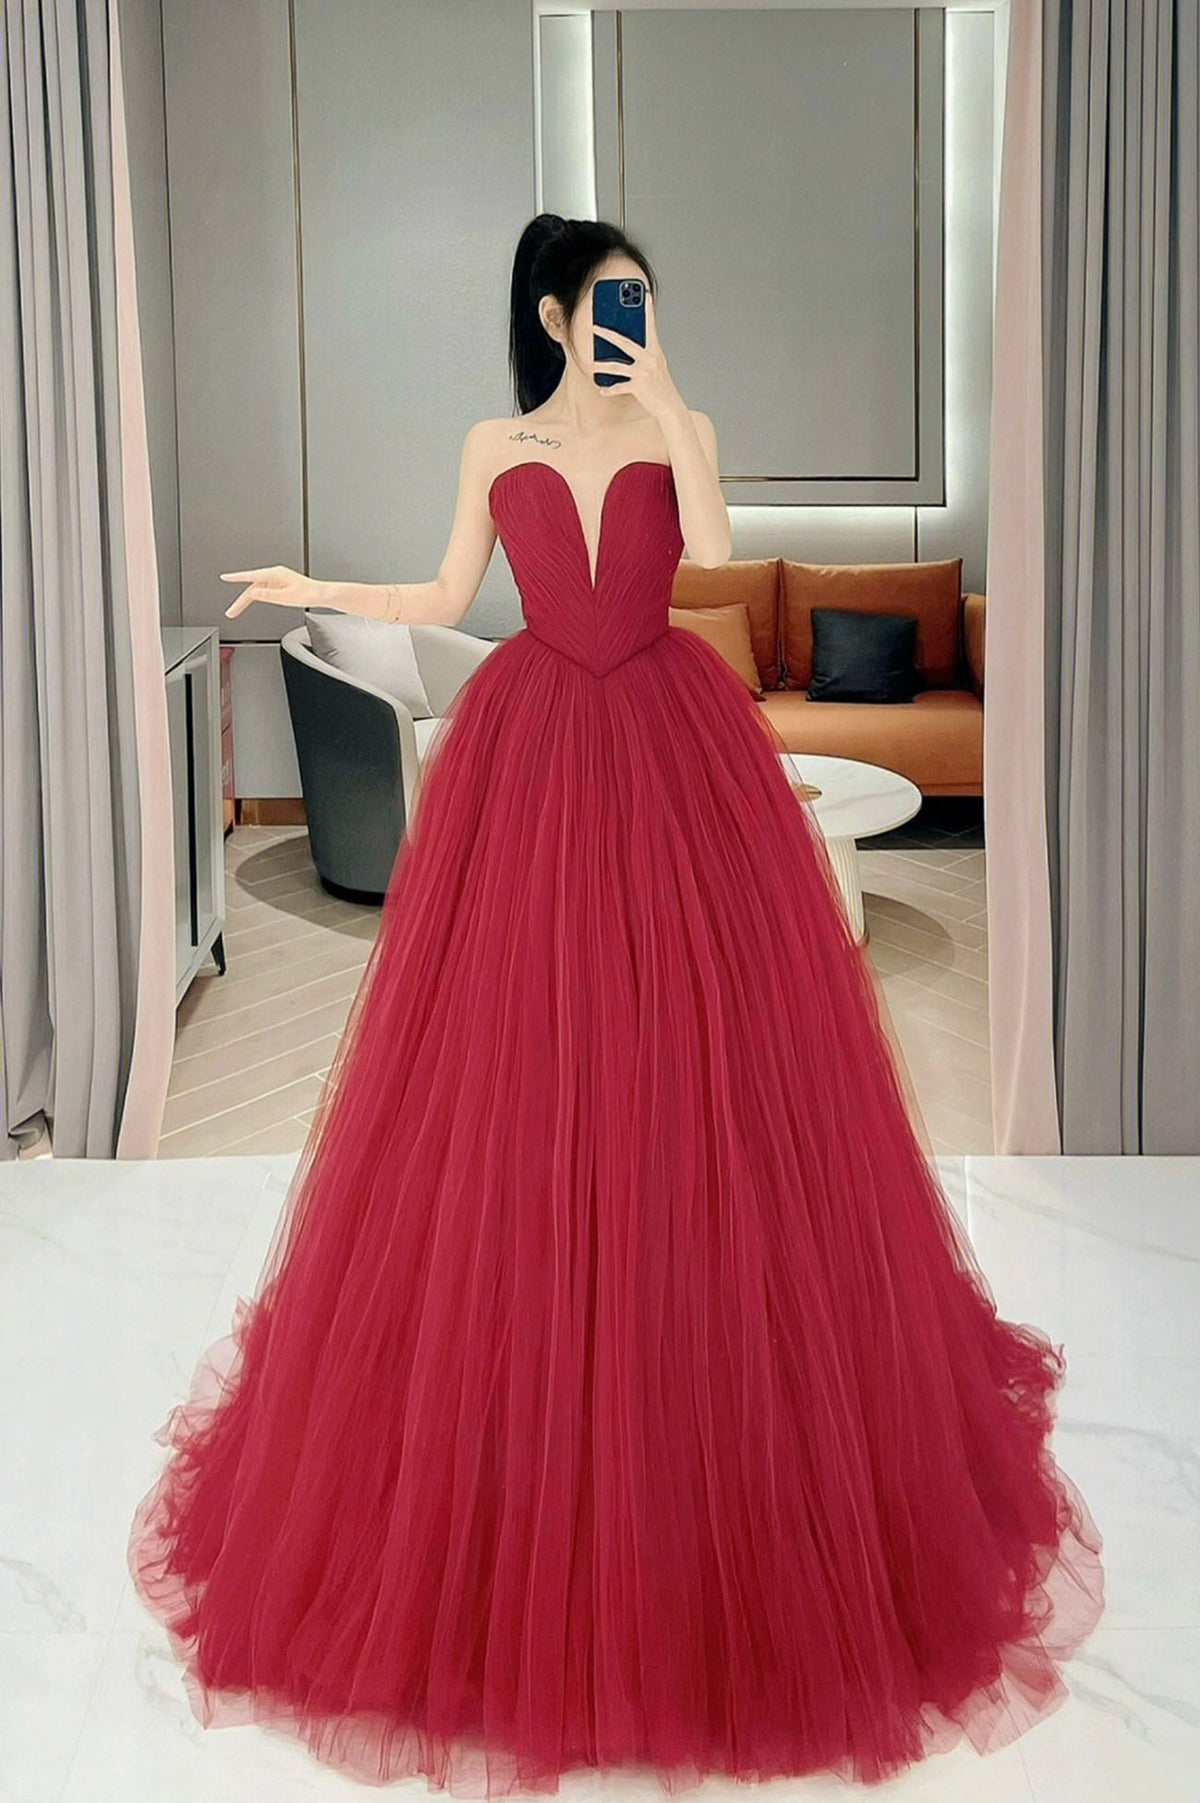 Strapless Red Tulle Prom Dress, A-Line Long Formal Evening Dress